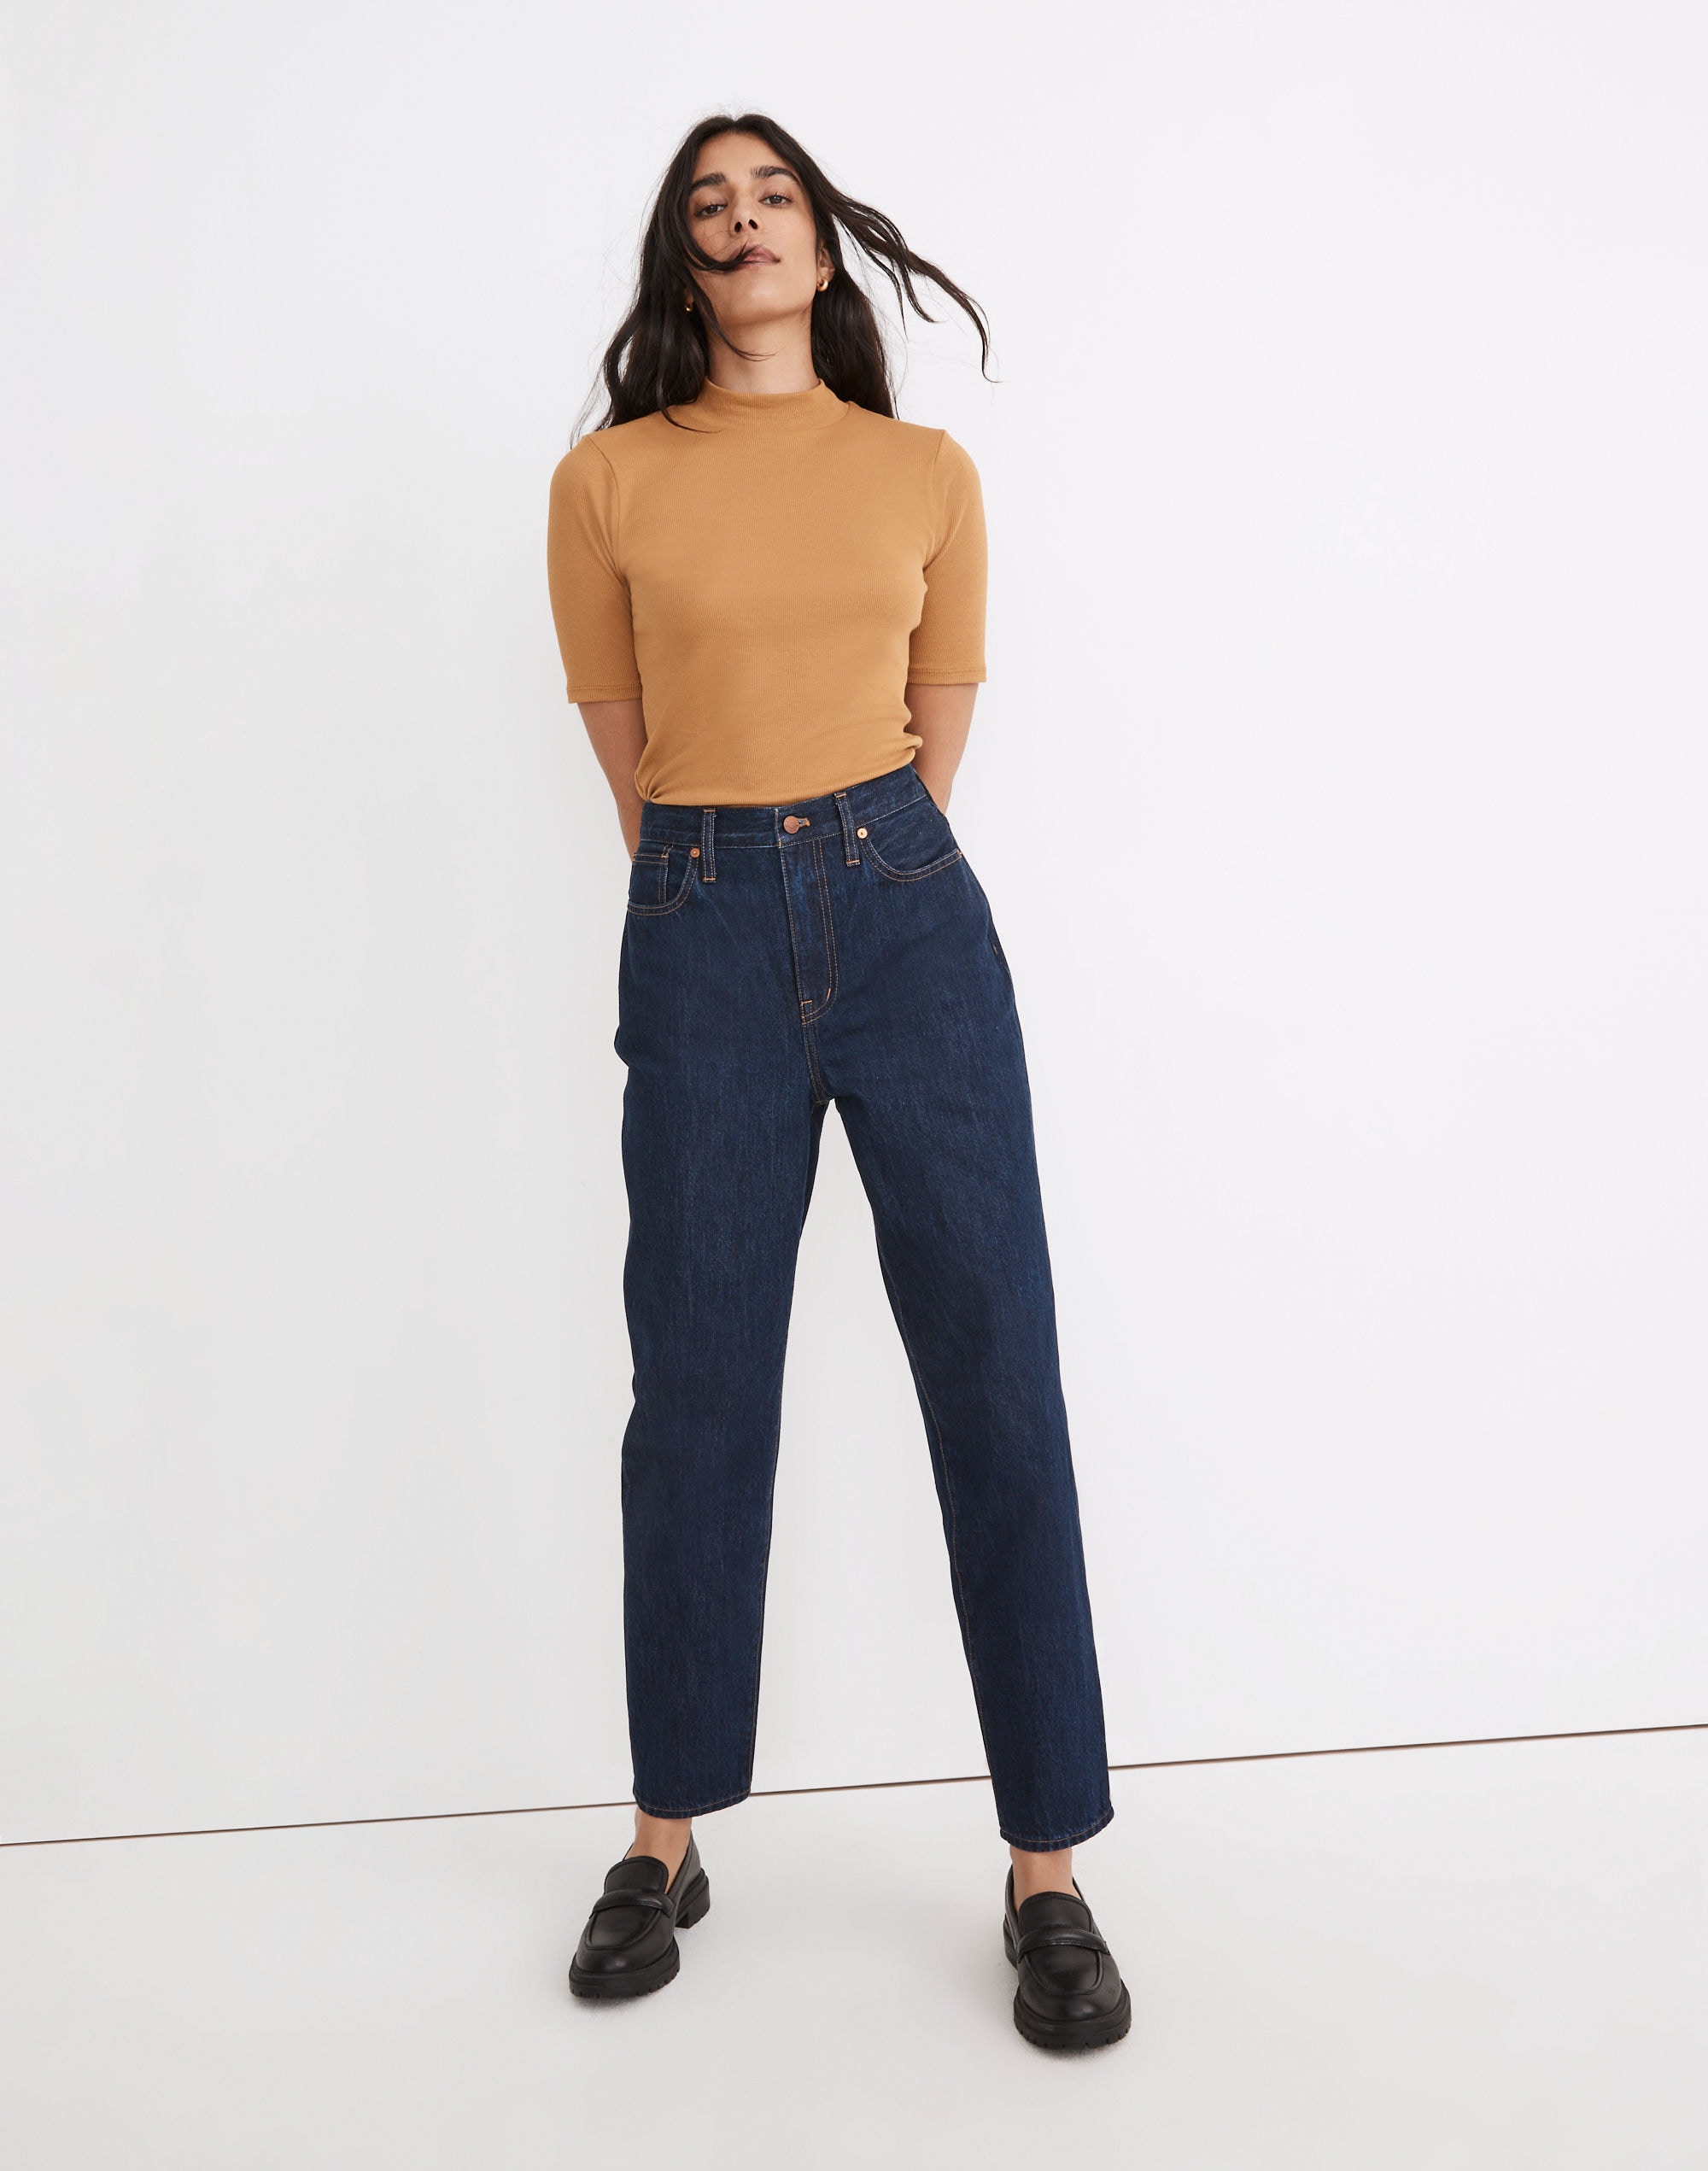 https://www.madewell.com/images/NG341_DM6243_m